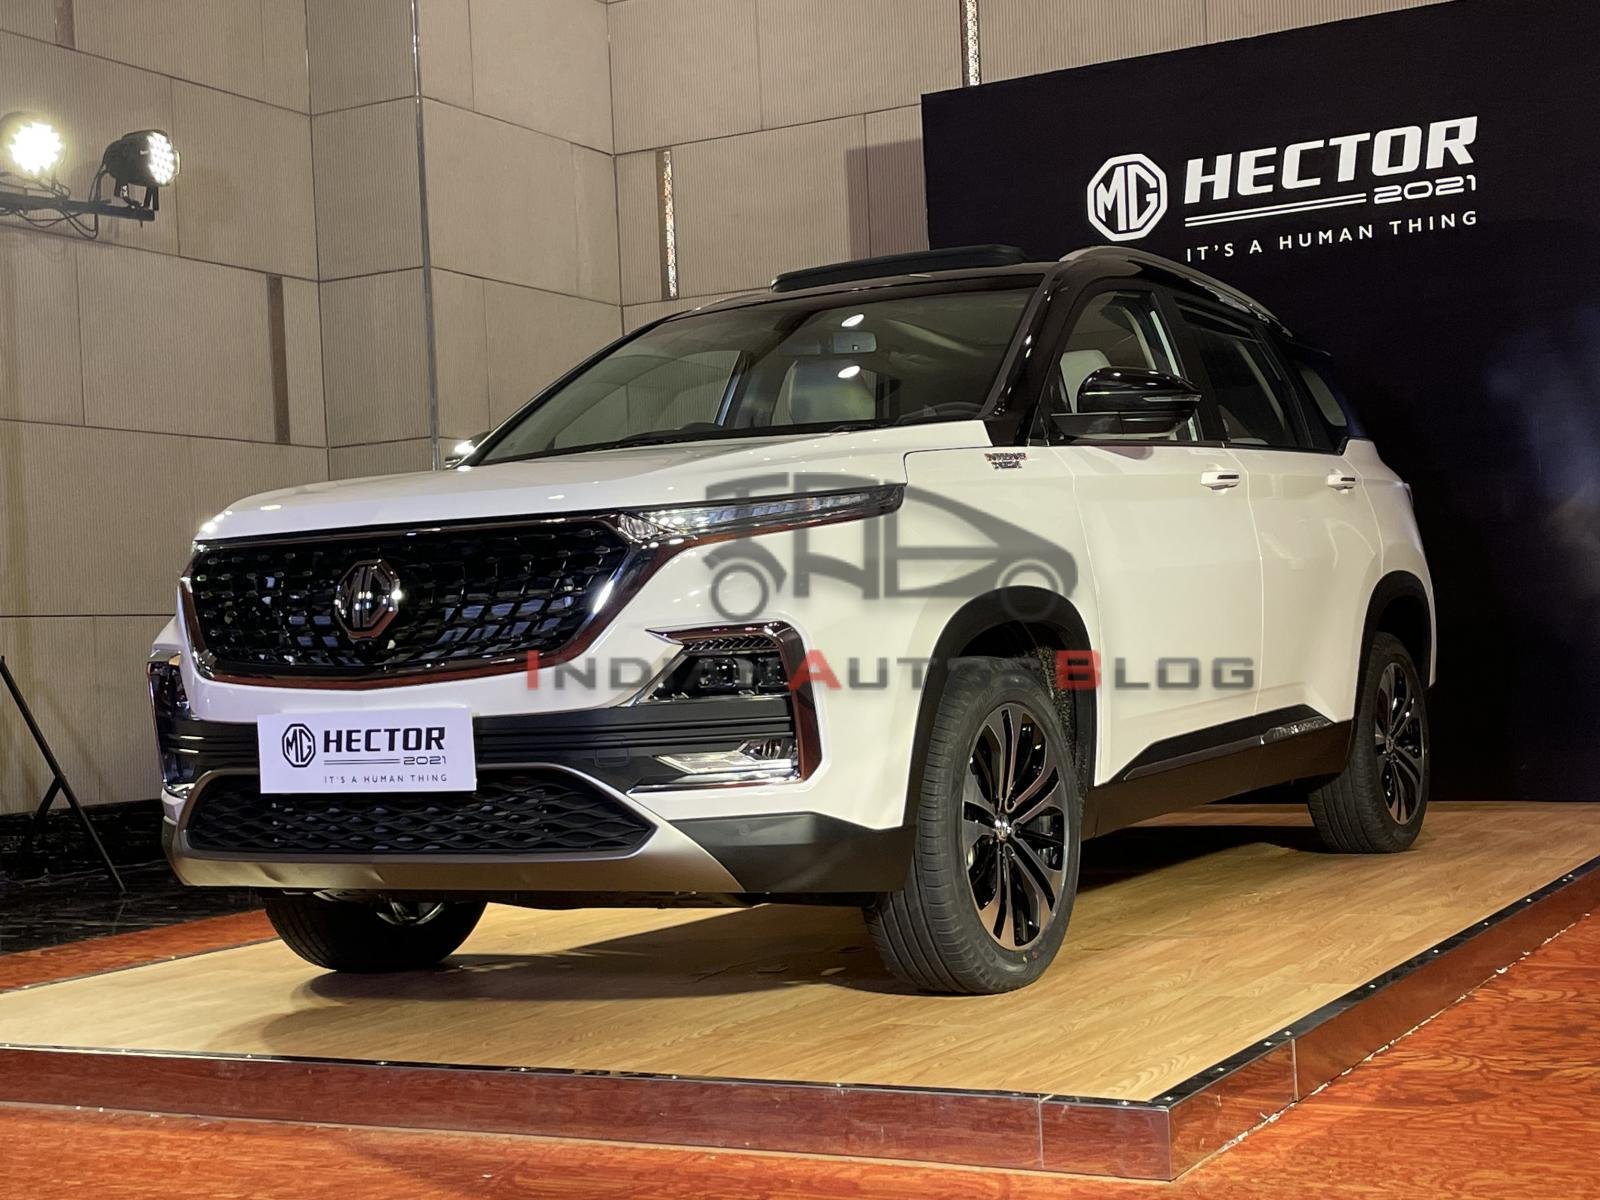 2021 Jeep Compass Compared Against 2021 MG Hector And Tata Harrier